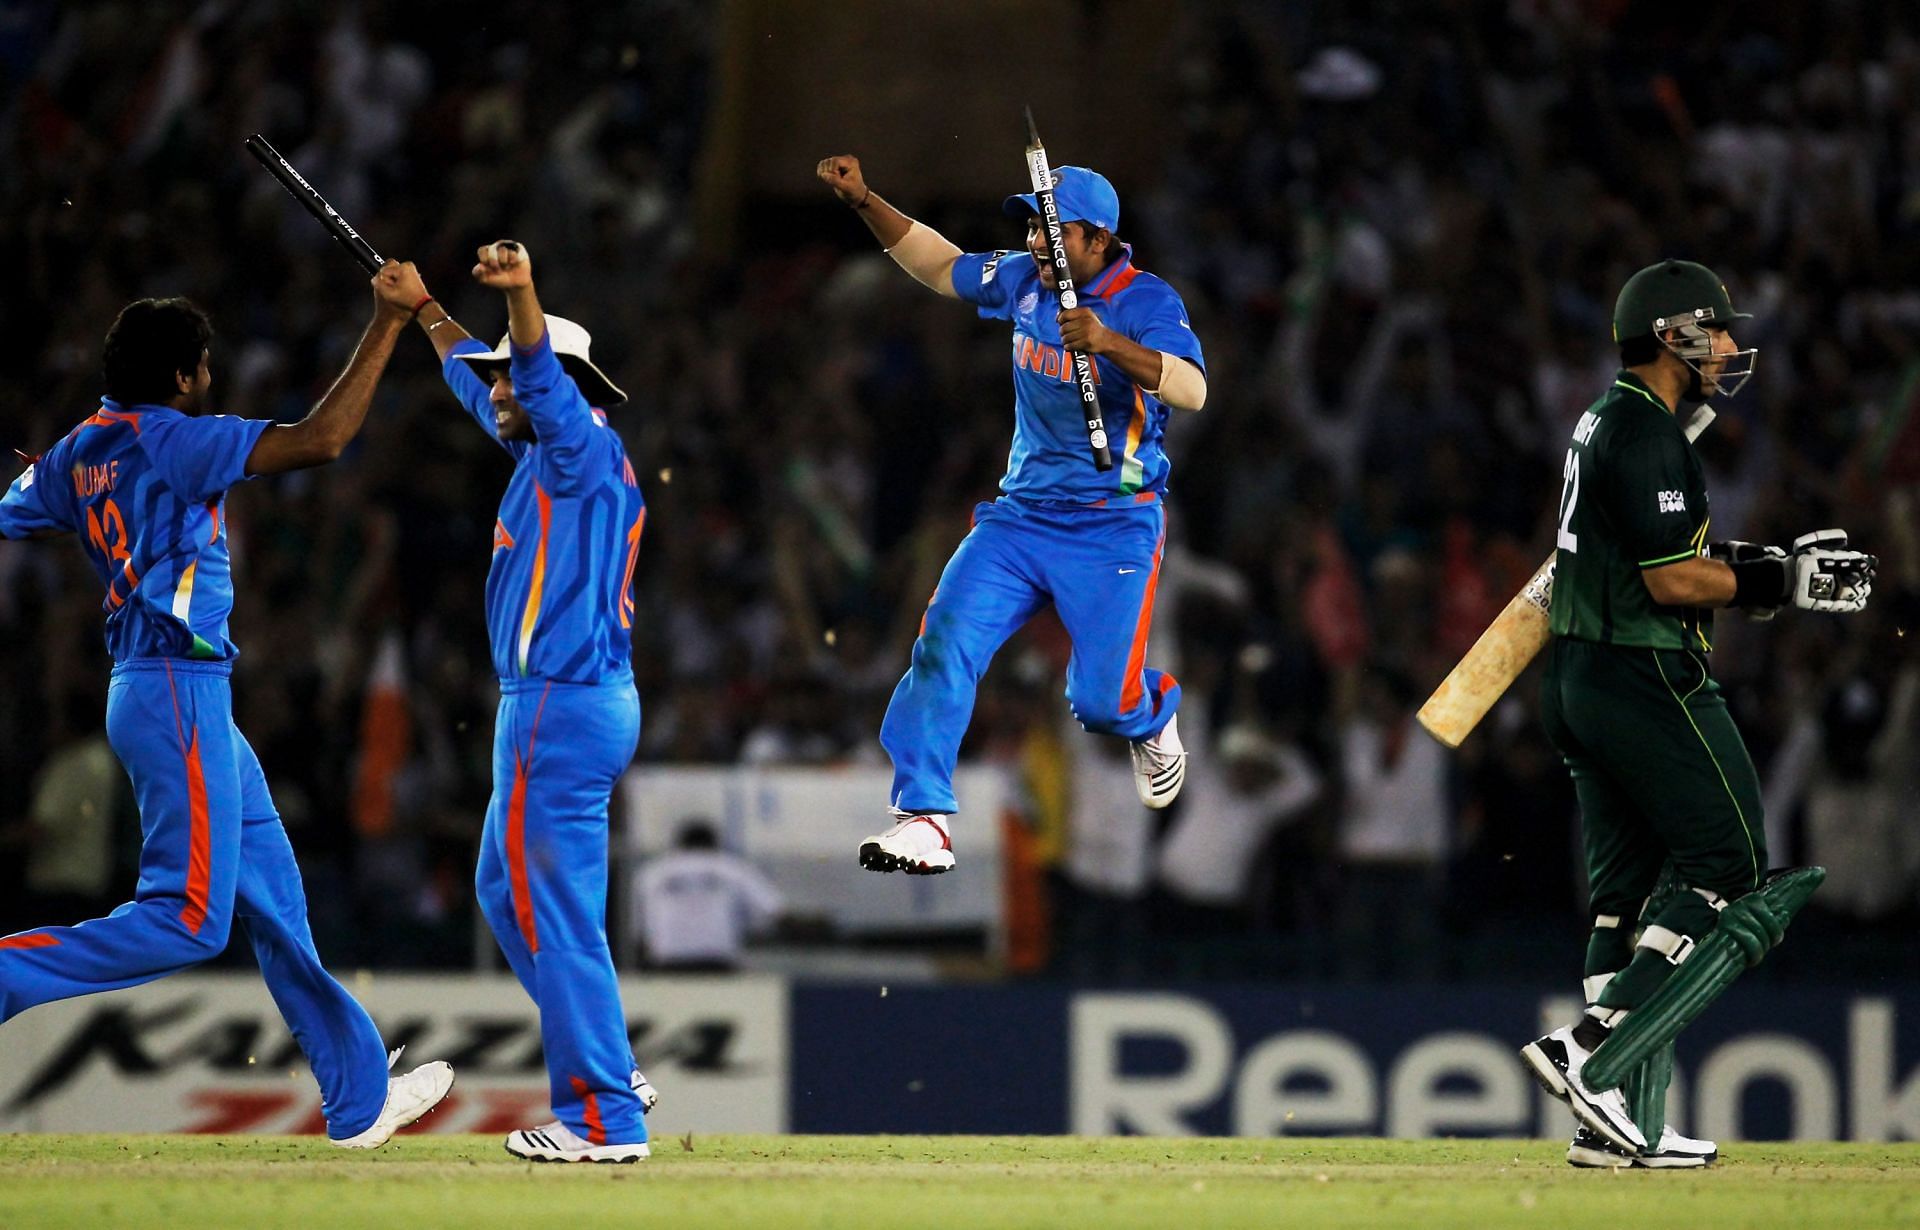 The Indian team celebrate their victory over Pakistan during the 2011 ICC World Cup second semi-final in Mohali. (Pic: Getty Images)